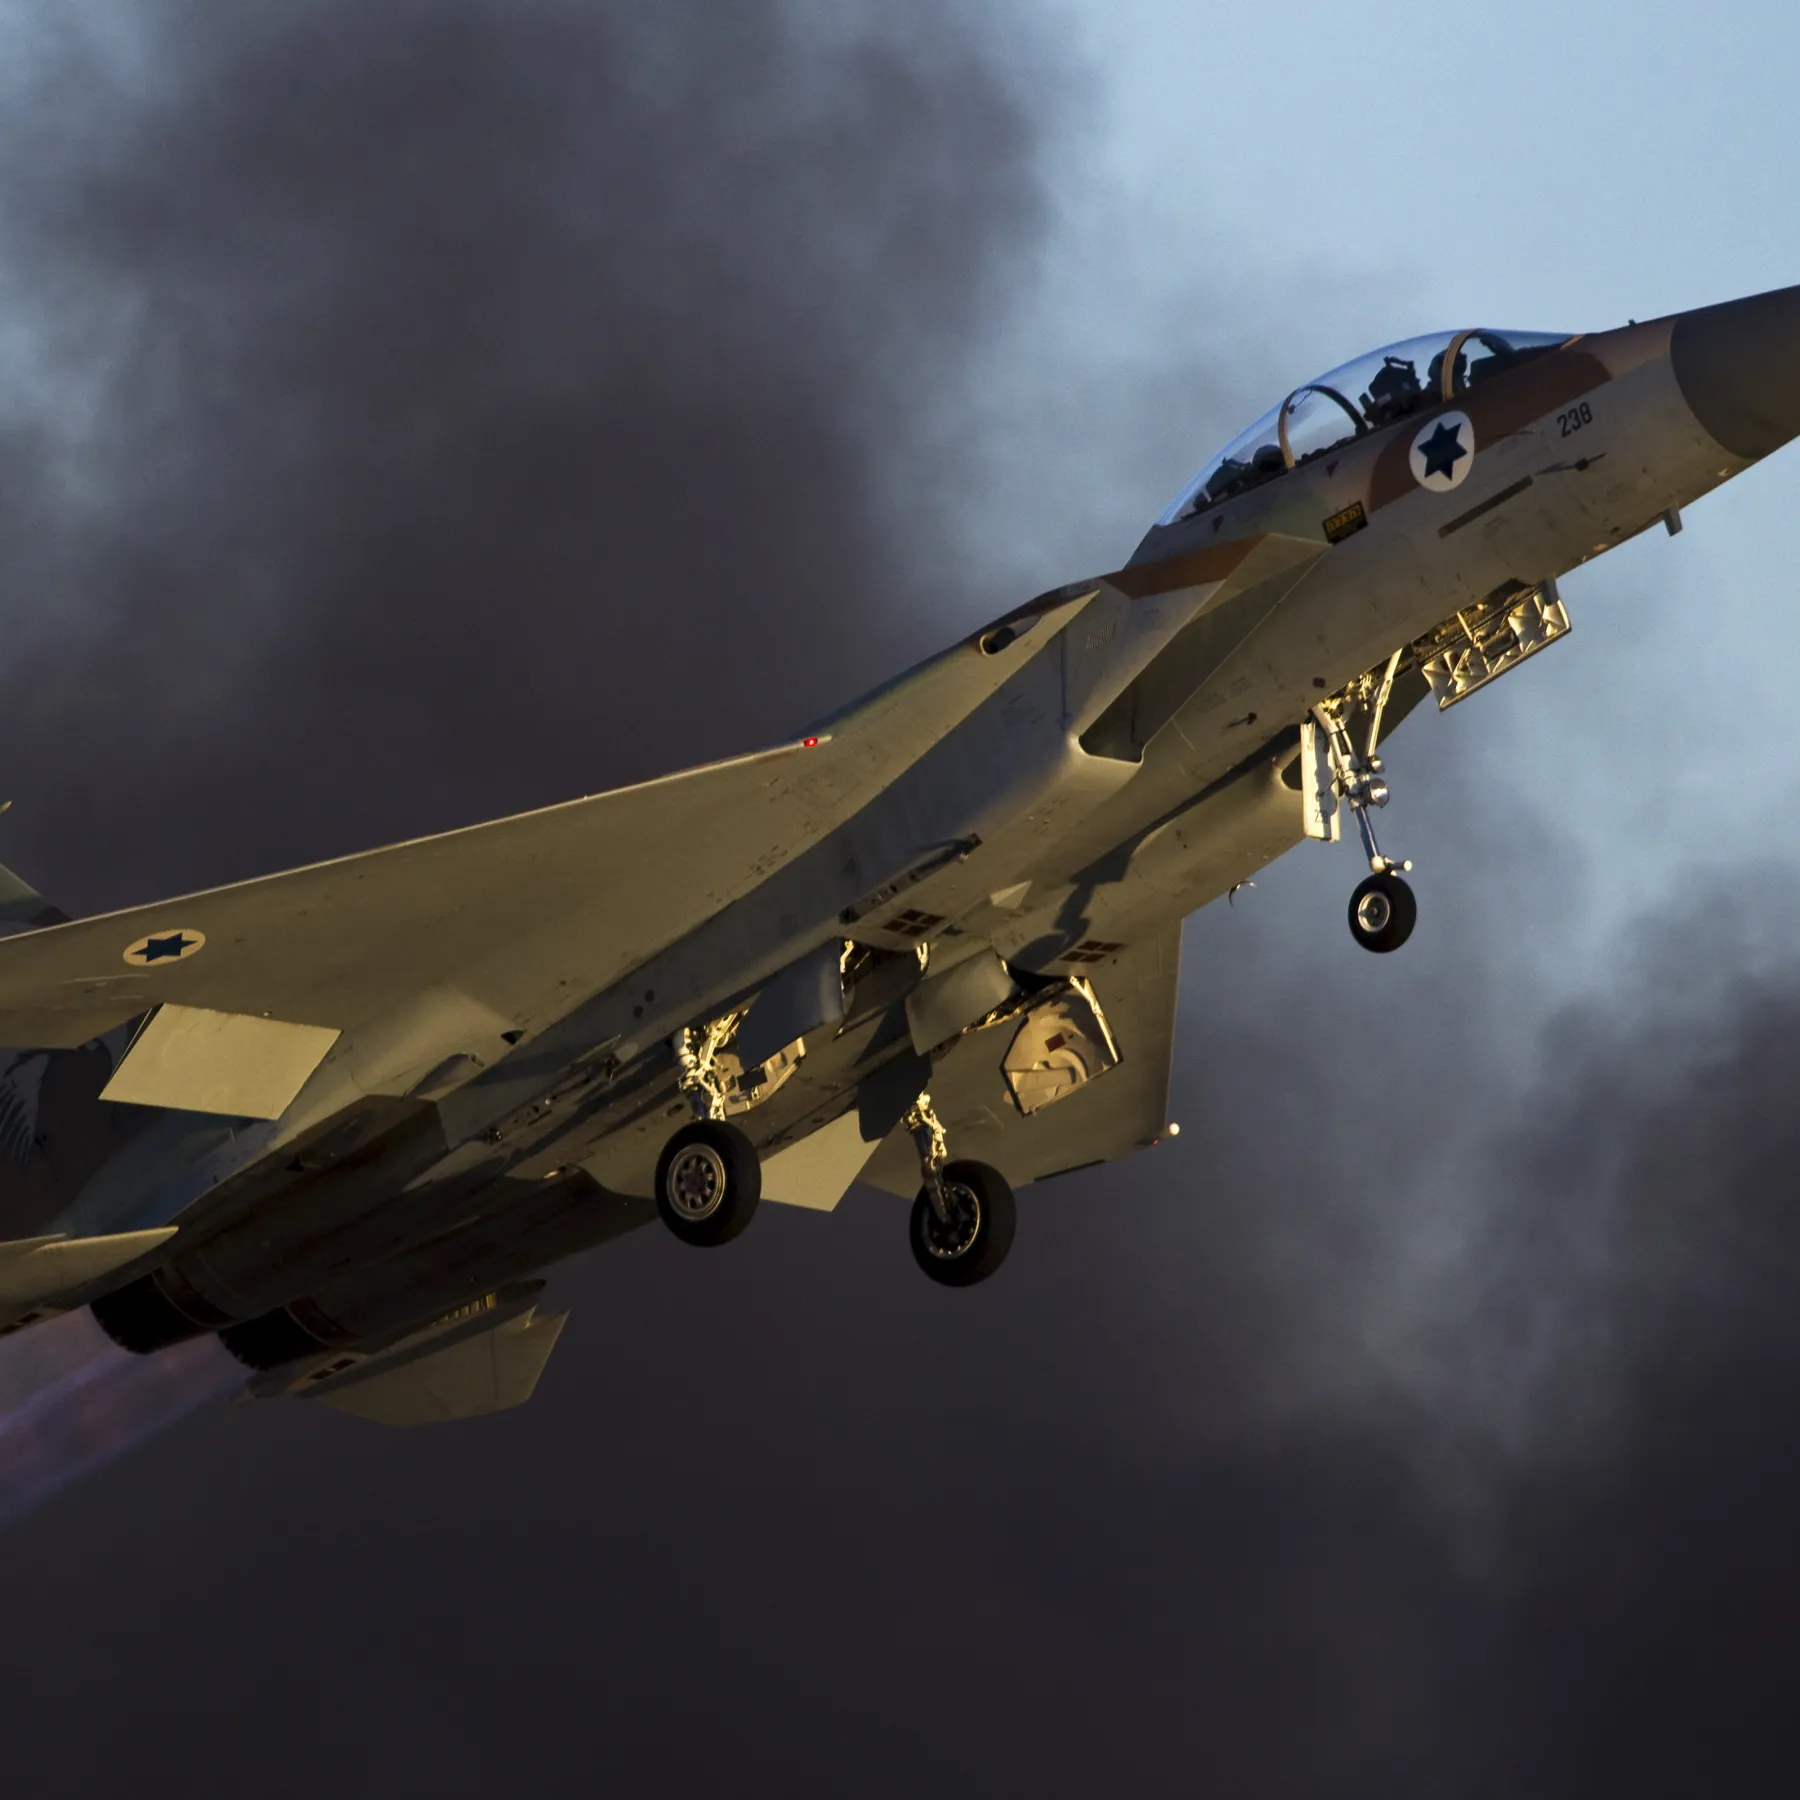 Zionist regime fighter jets bomb positions in southwestern Syria, neighboring Iraq: Report